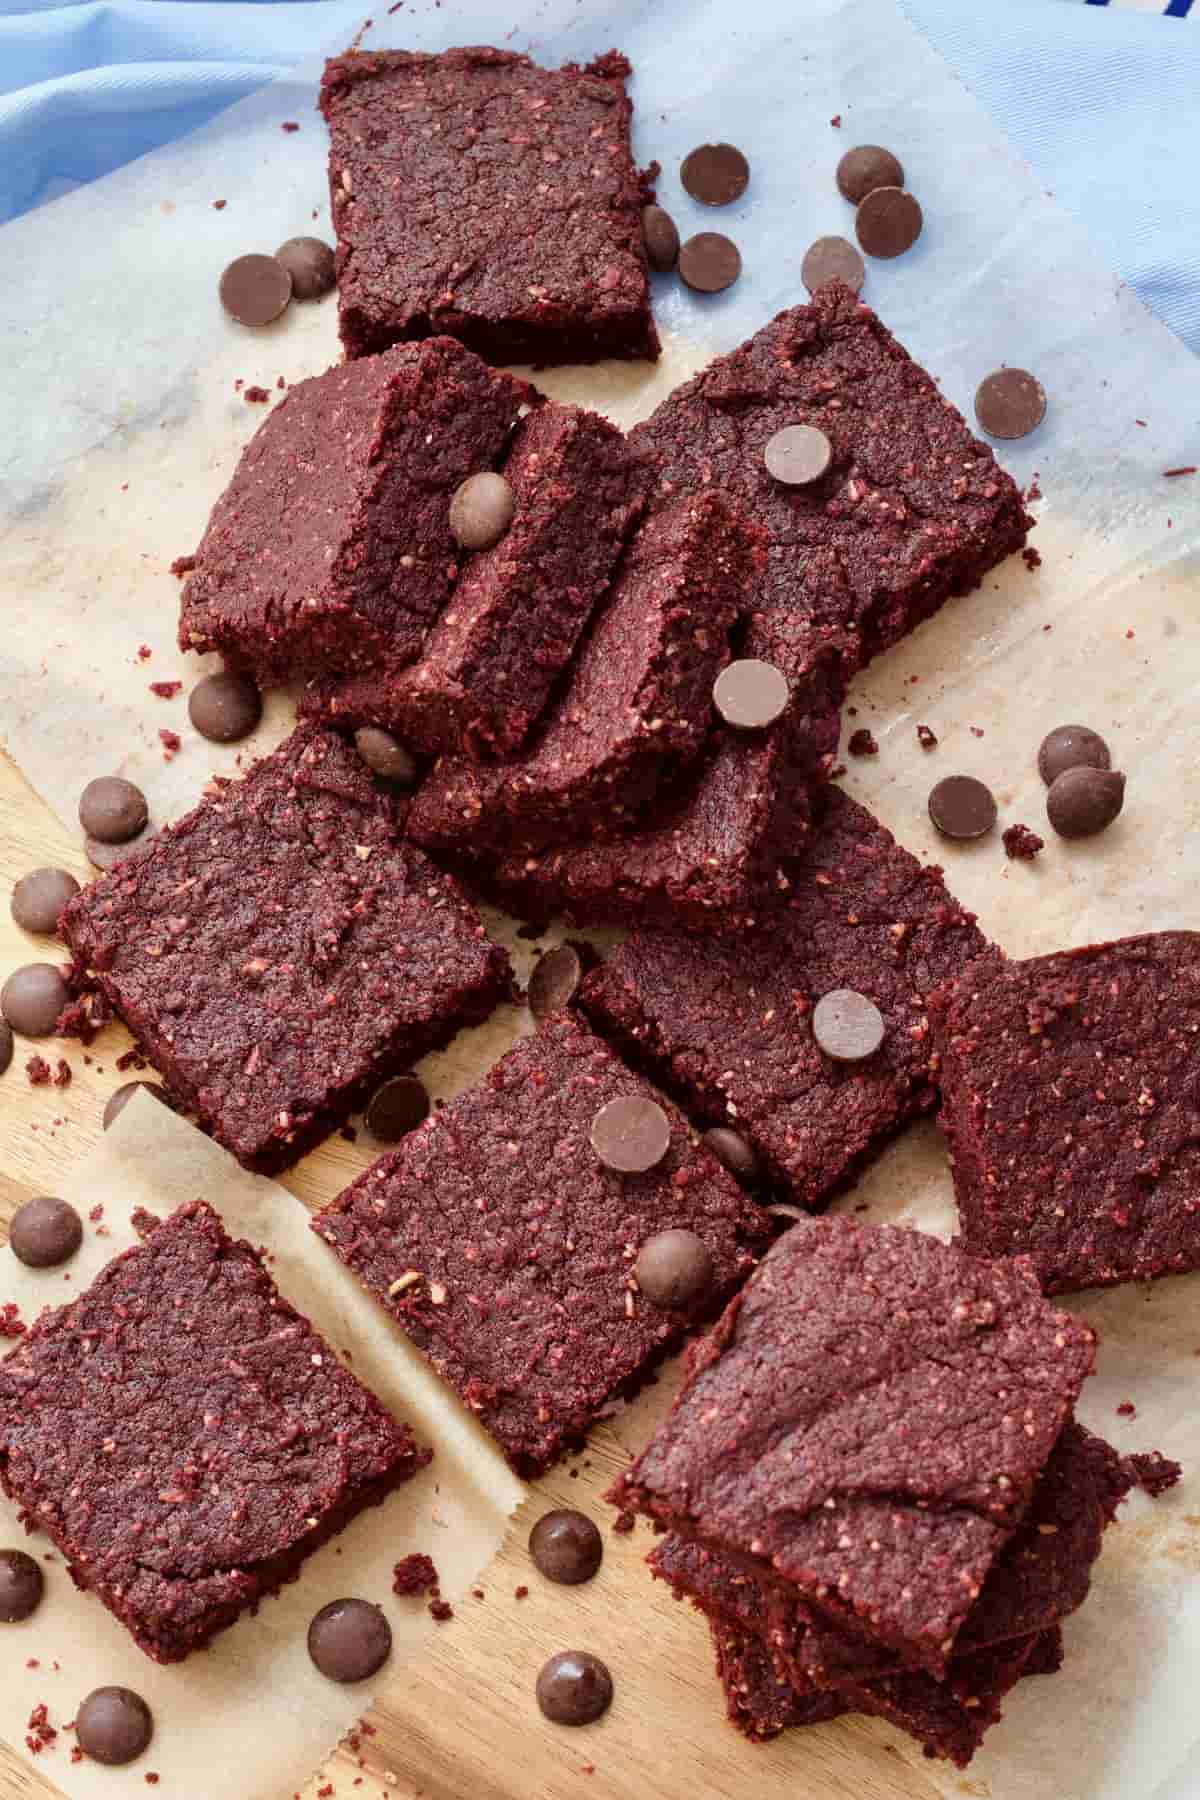 Squares of beetroot brownies with chocolate chips sprinkled over.